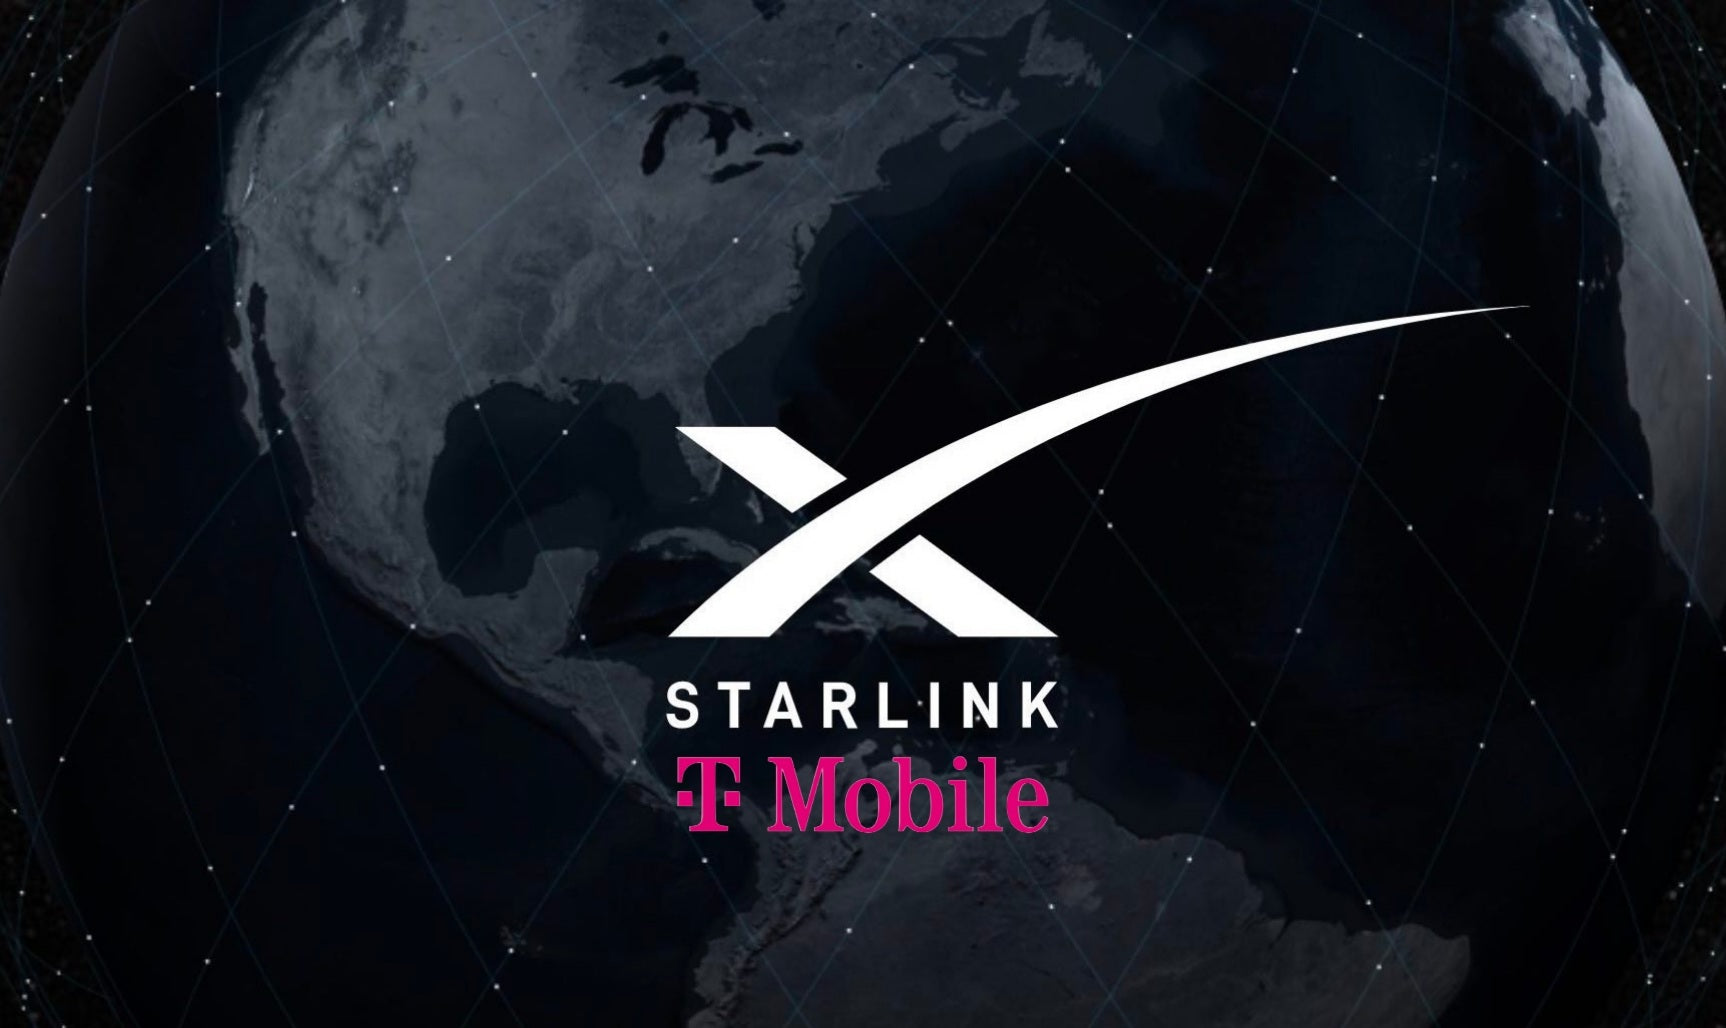 SpaceX founder Elon Musk & T-Mobile CEO Mike Sievert will announce plans to 'increase connectivity' with Starlink –Watch It Live!